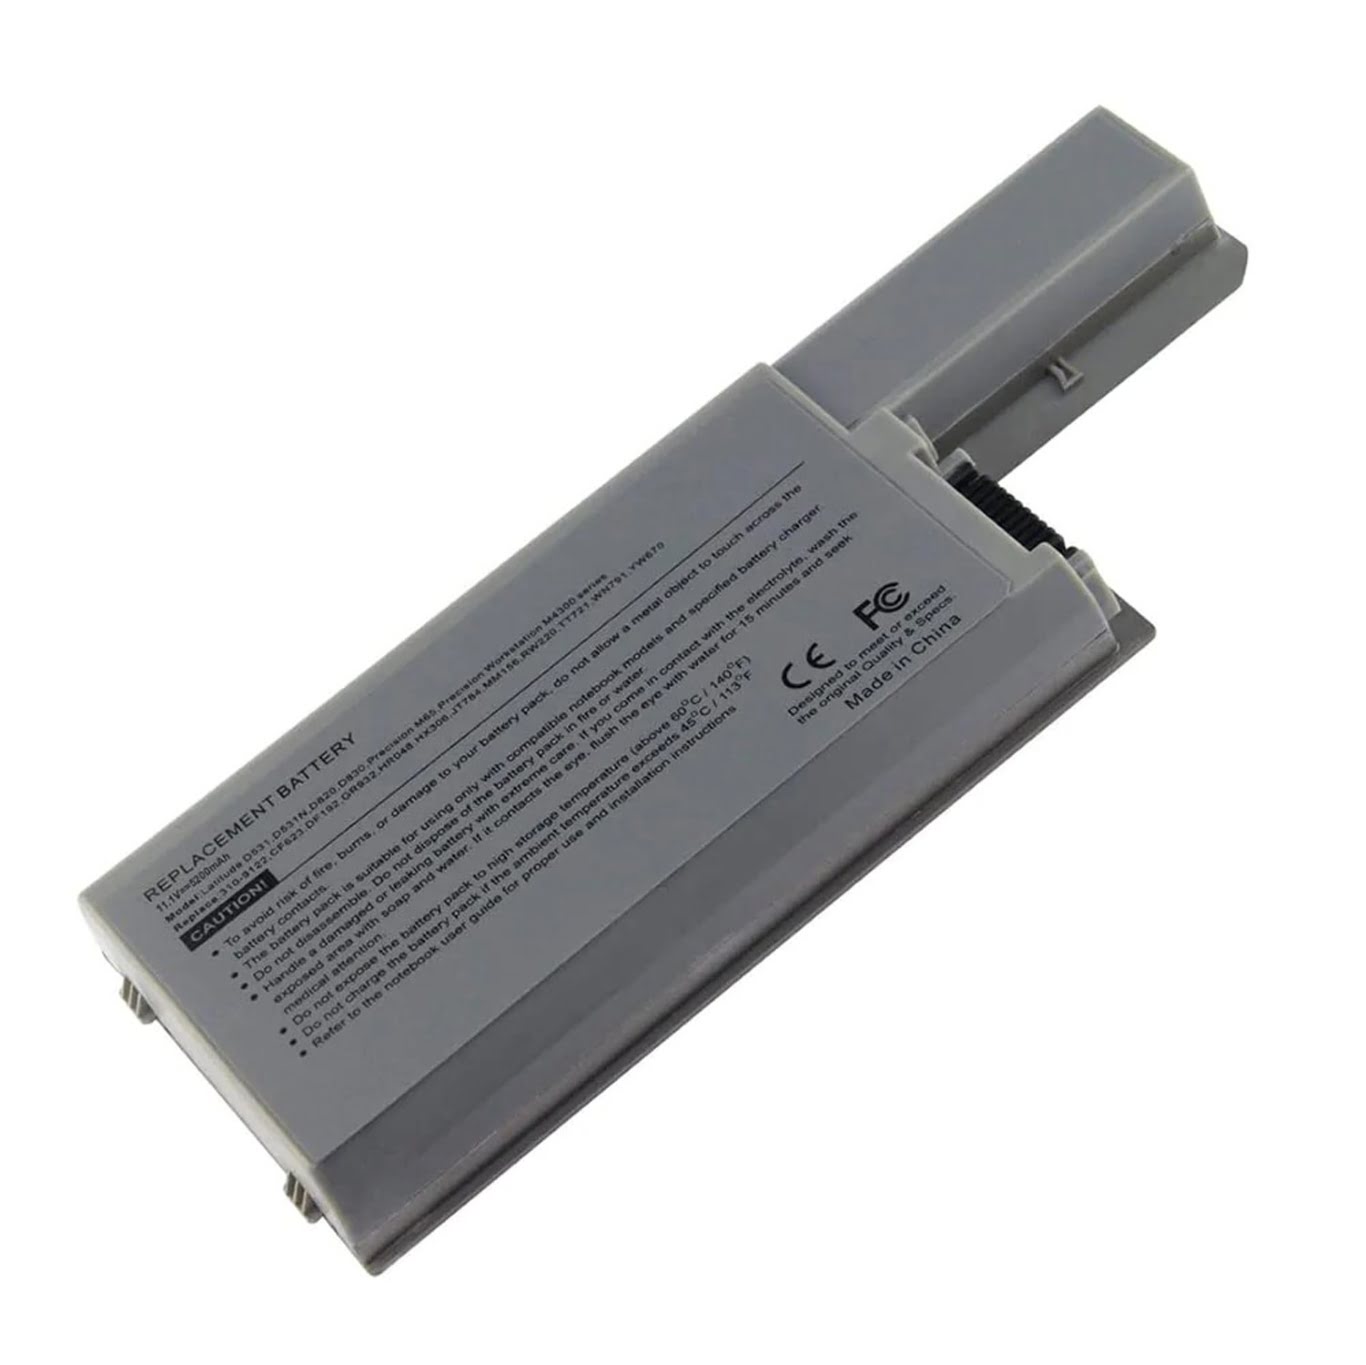 0CW666, 0CW674 replacement Laptop Battery for Dell Latitude D531, Latitude D531N, 6 cells, 11.1V, 4400mah/49wh